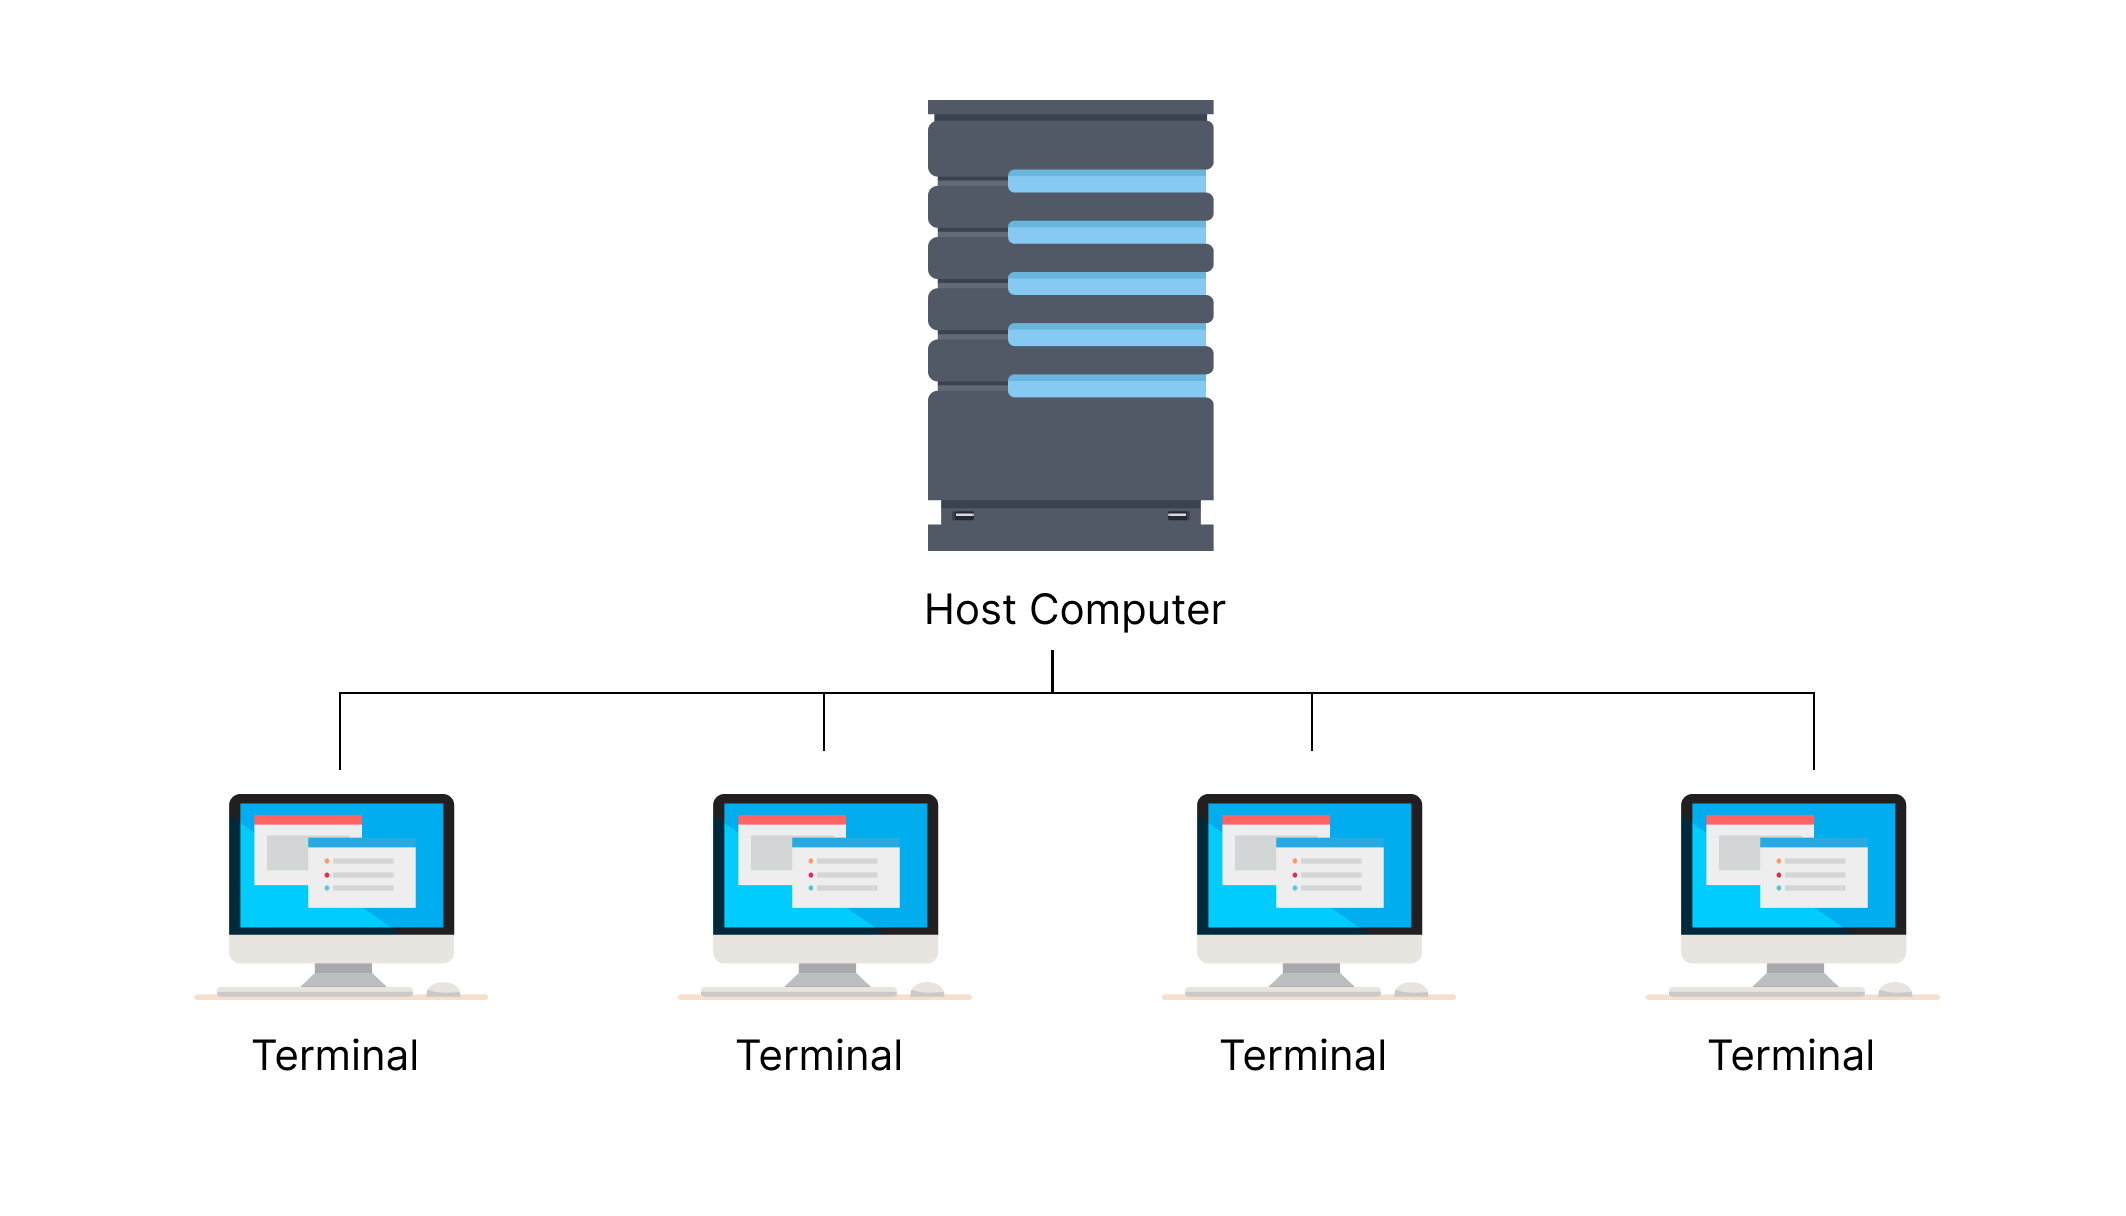 Image of SaaS architecture.